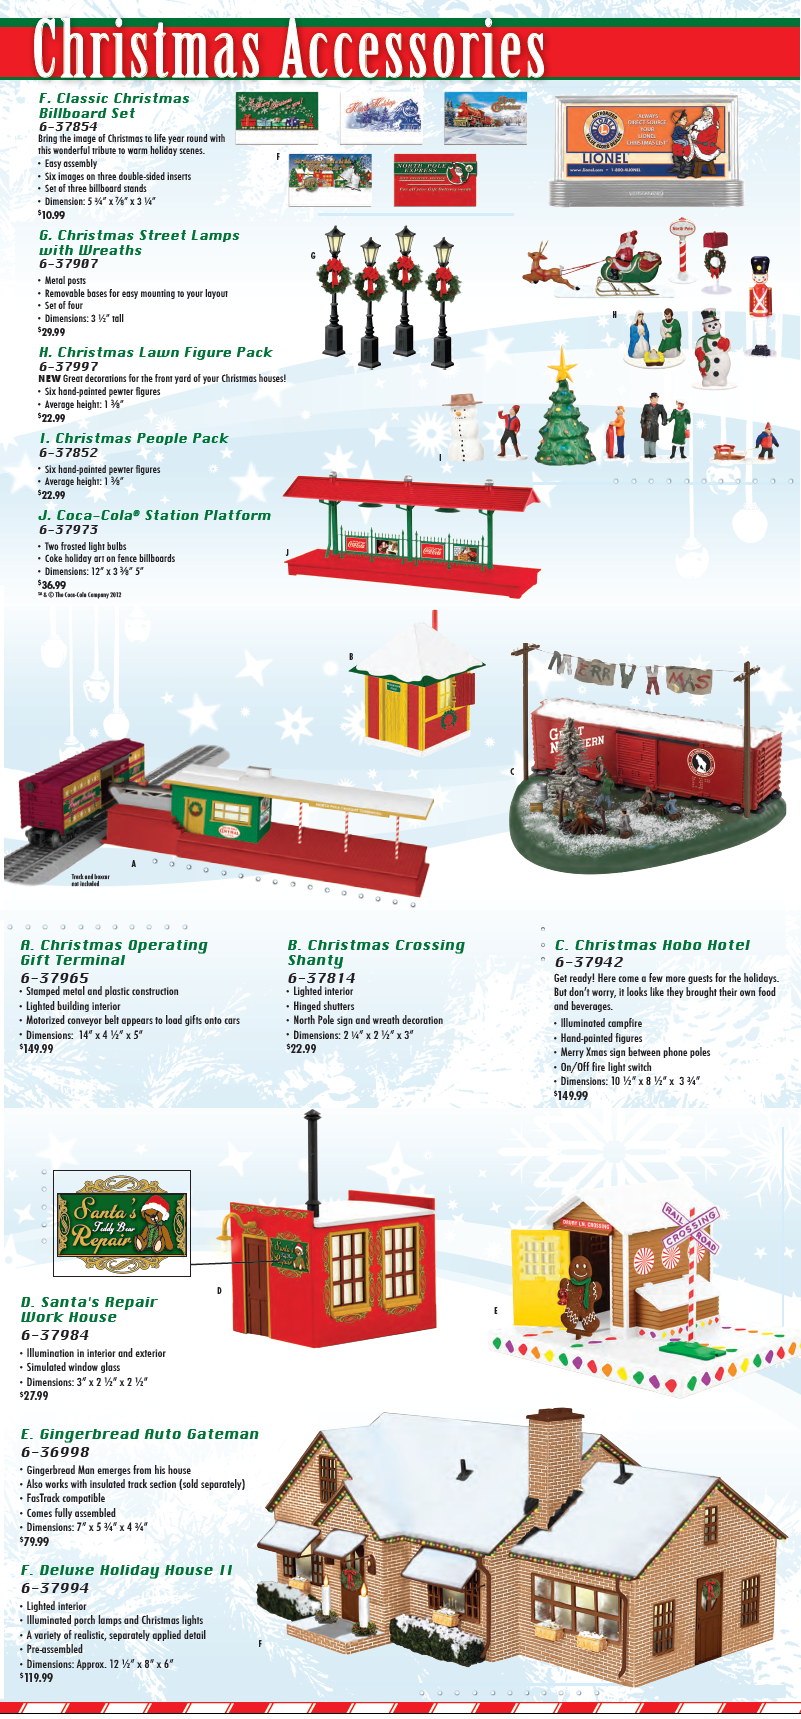 Lionel Christmas accessories